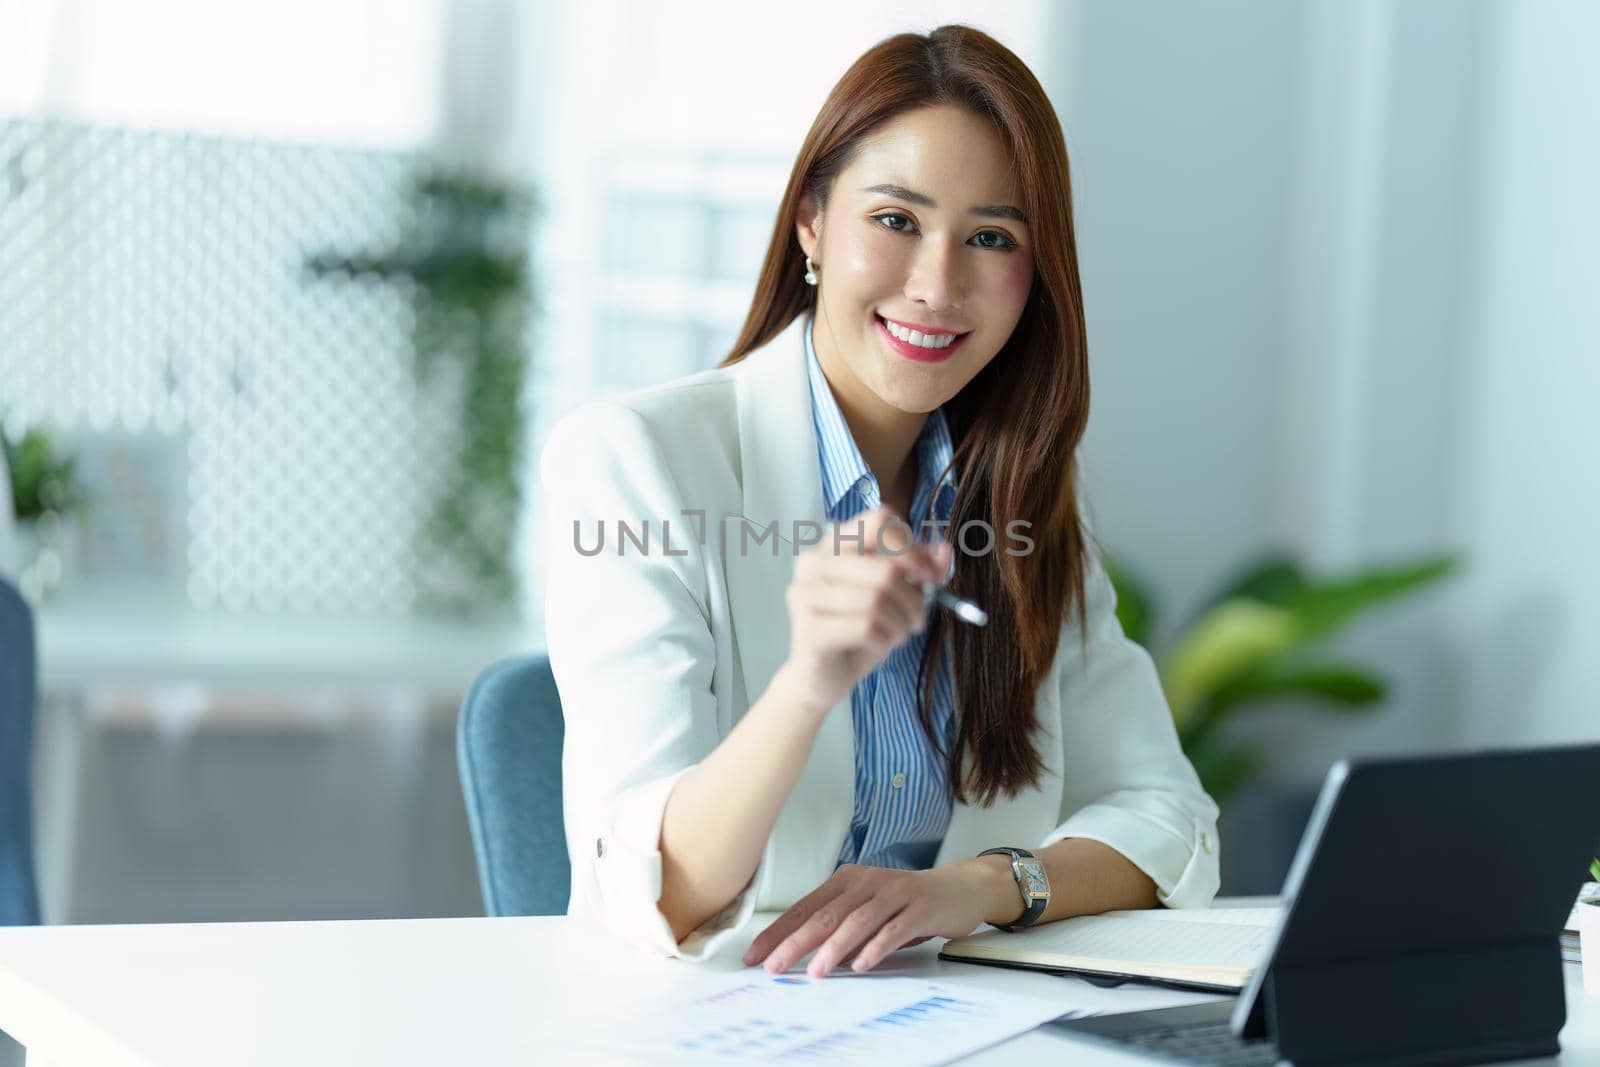 Portrait of an Asian business woman sitting at work and using a tablet computer in the office.